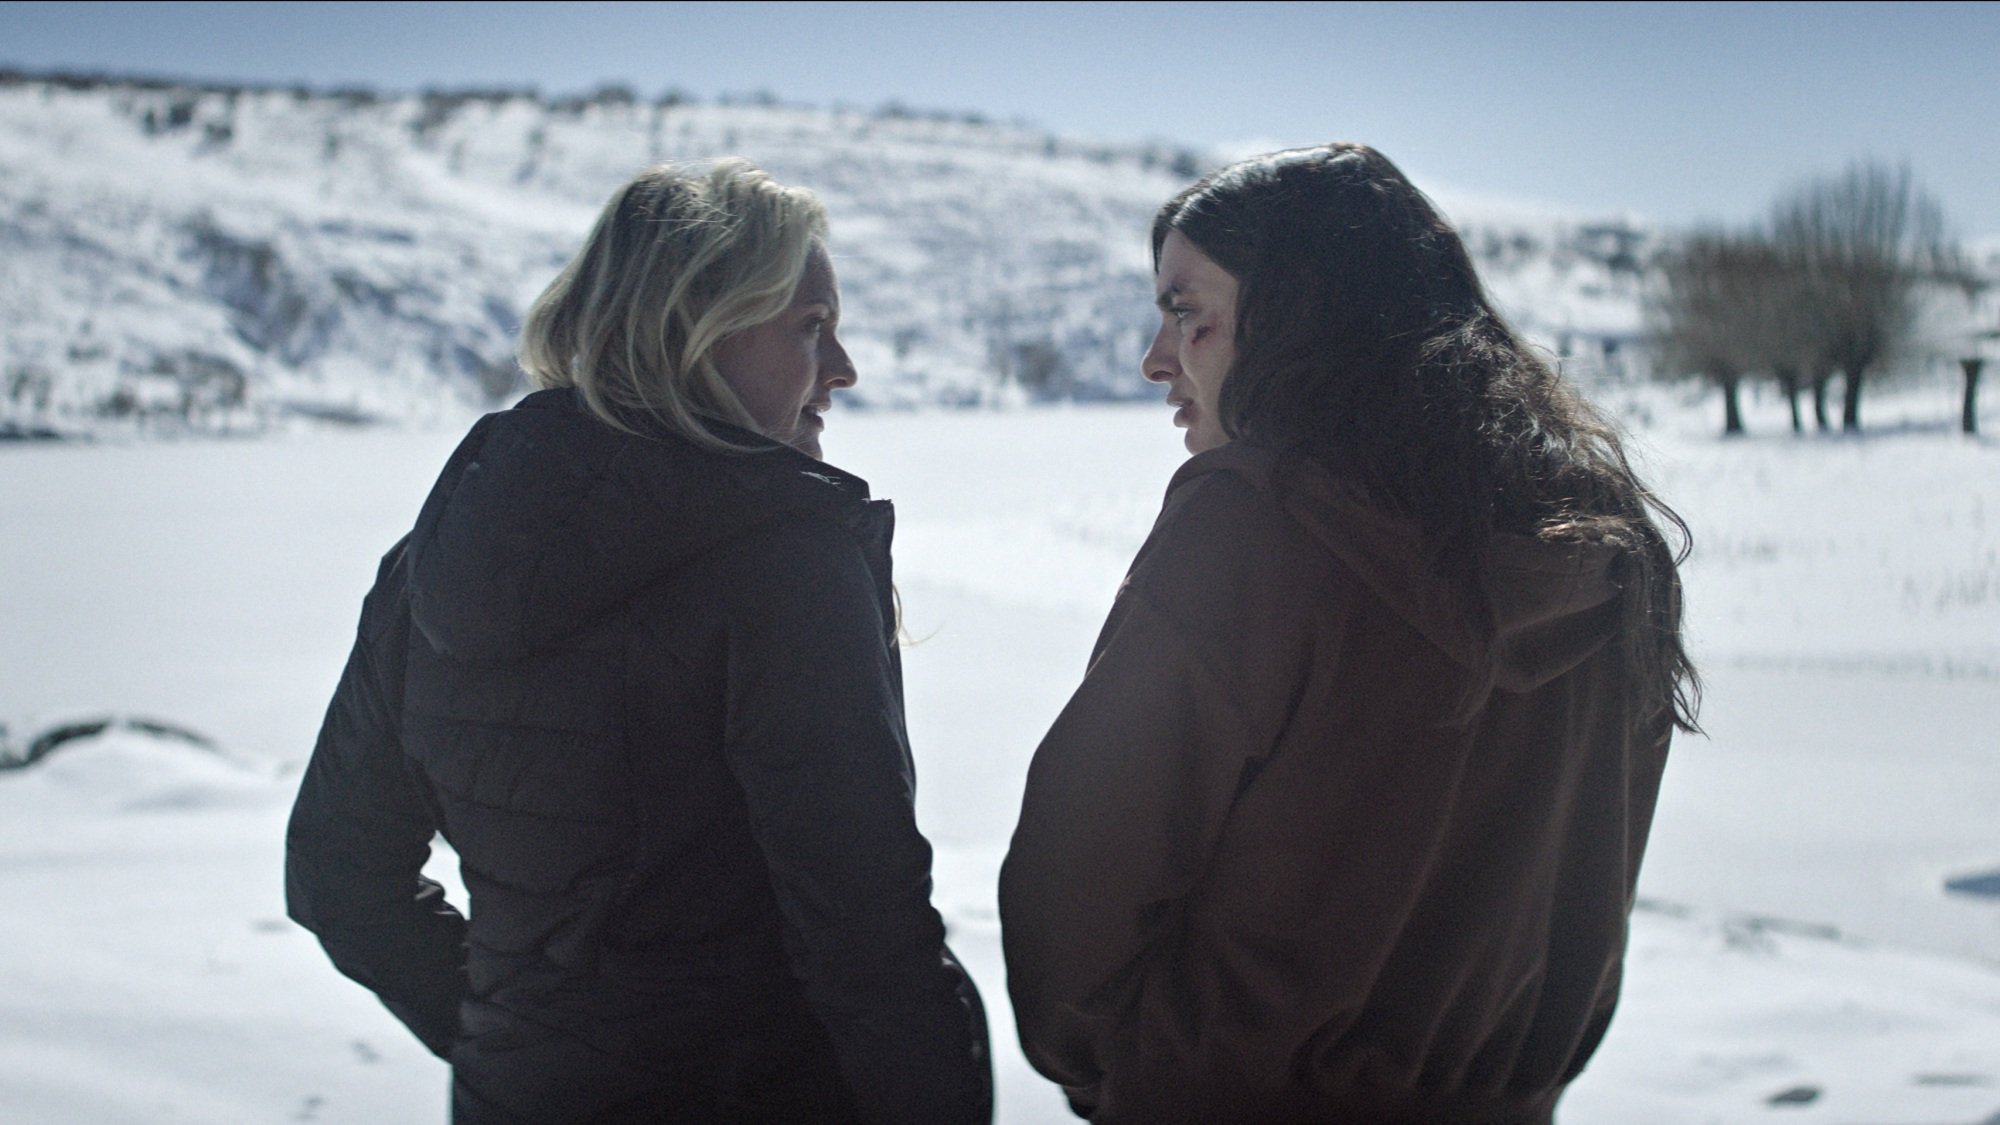 Two woman talking while in a vast snowy plain.